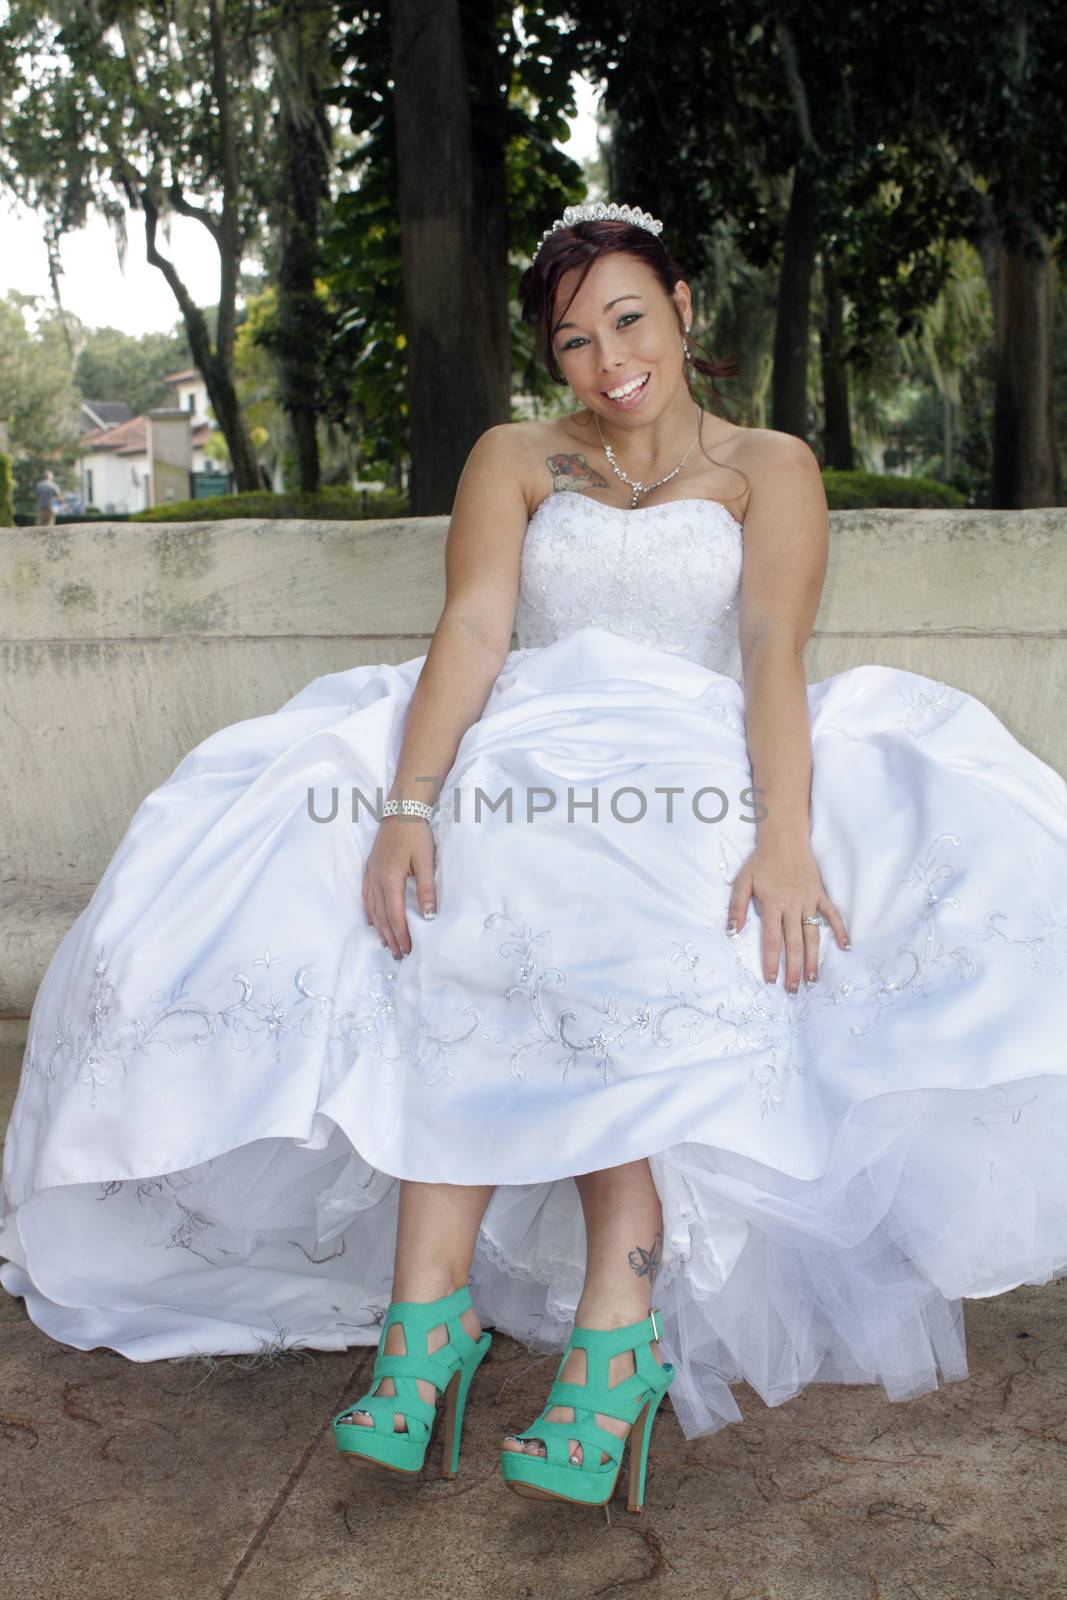 Beautiful Bride Shows Her New Shoes by csproductions